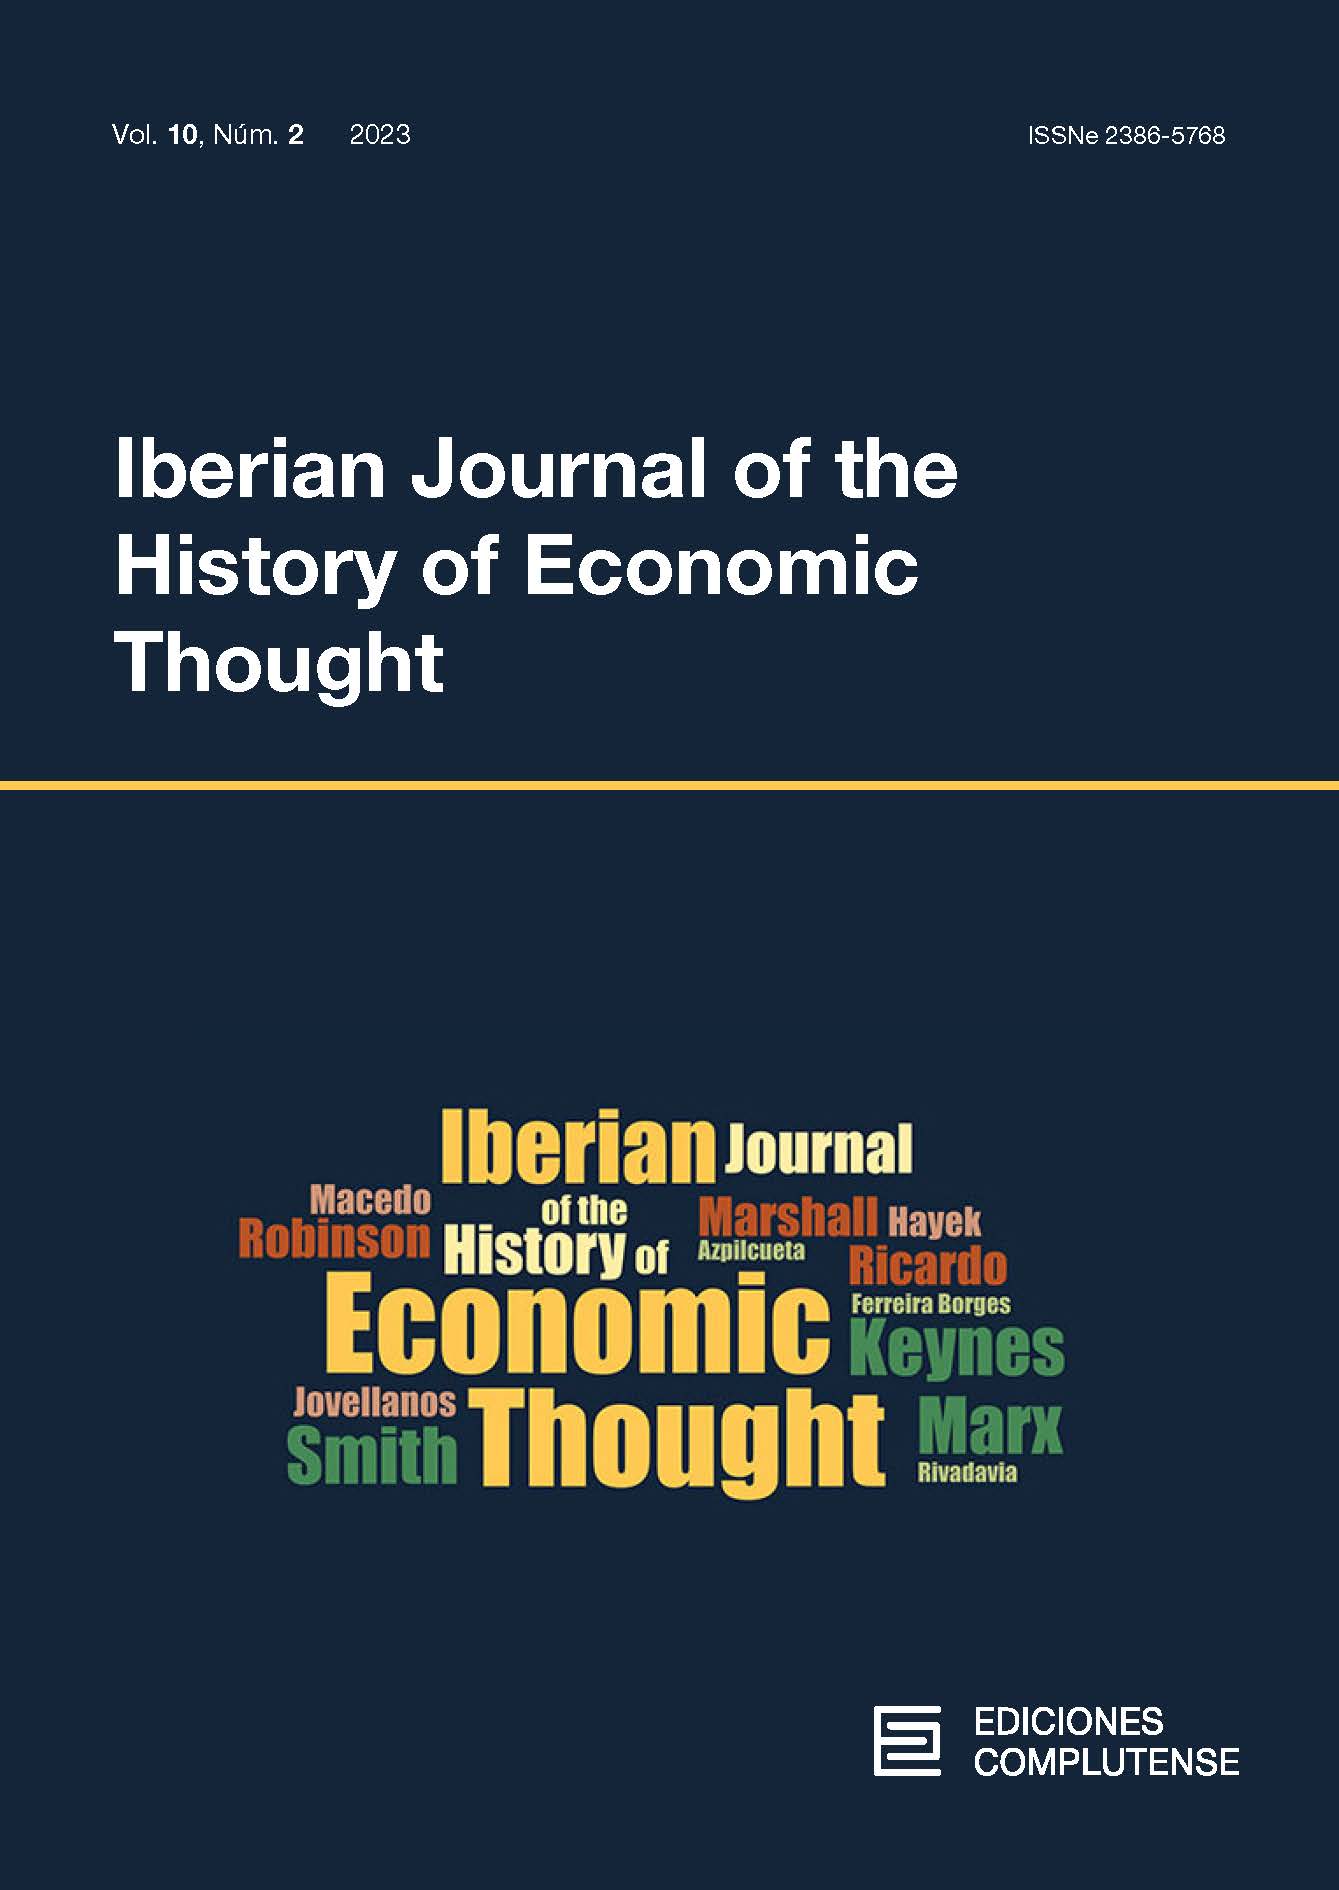 Cubierta Iberian Journal of the History of Economic Thought 10 (2) 2023